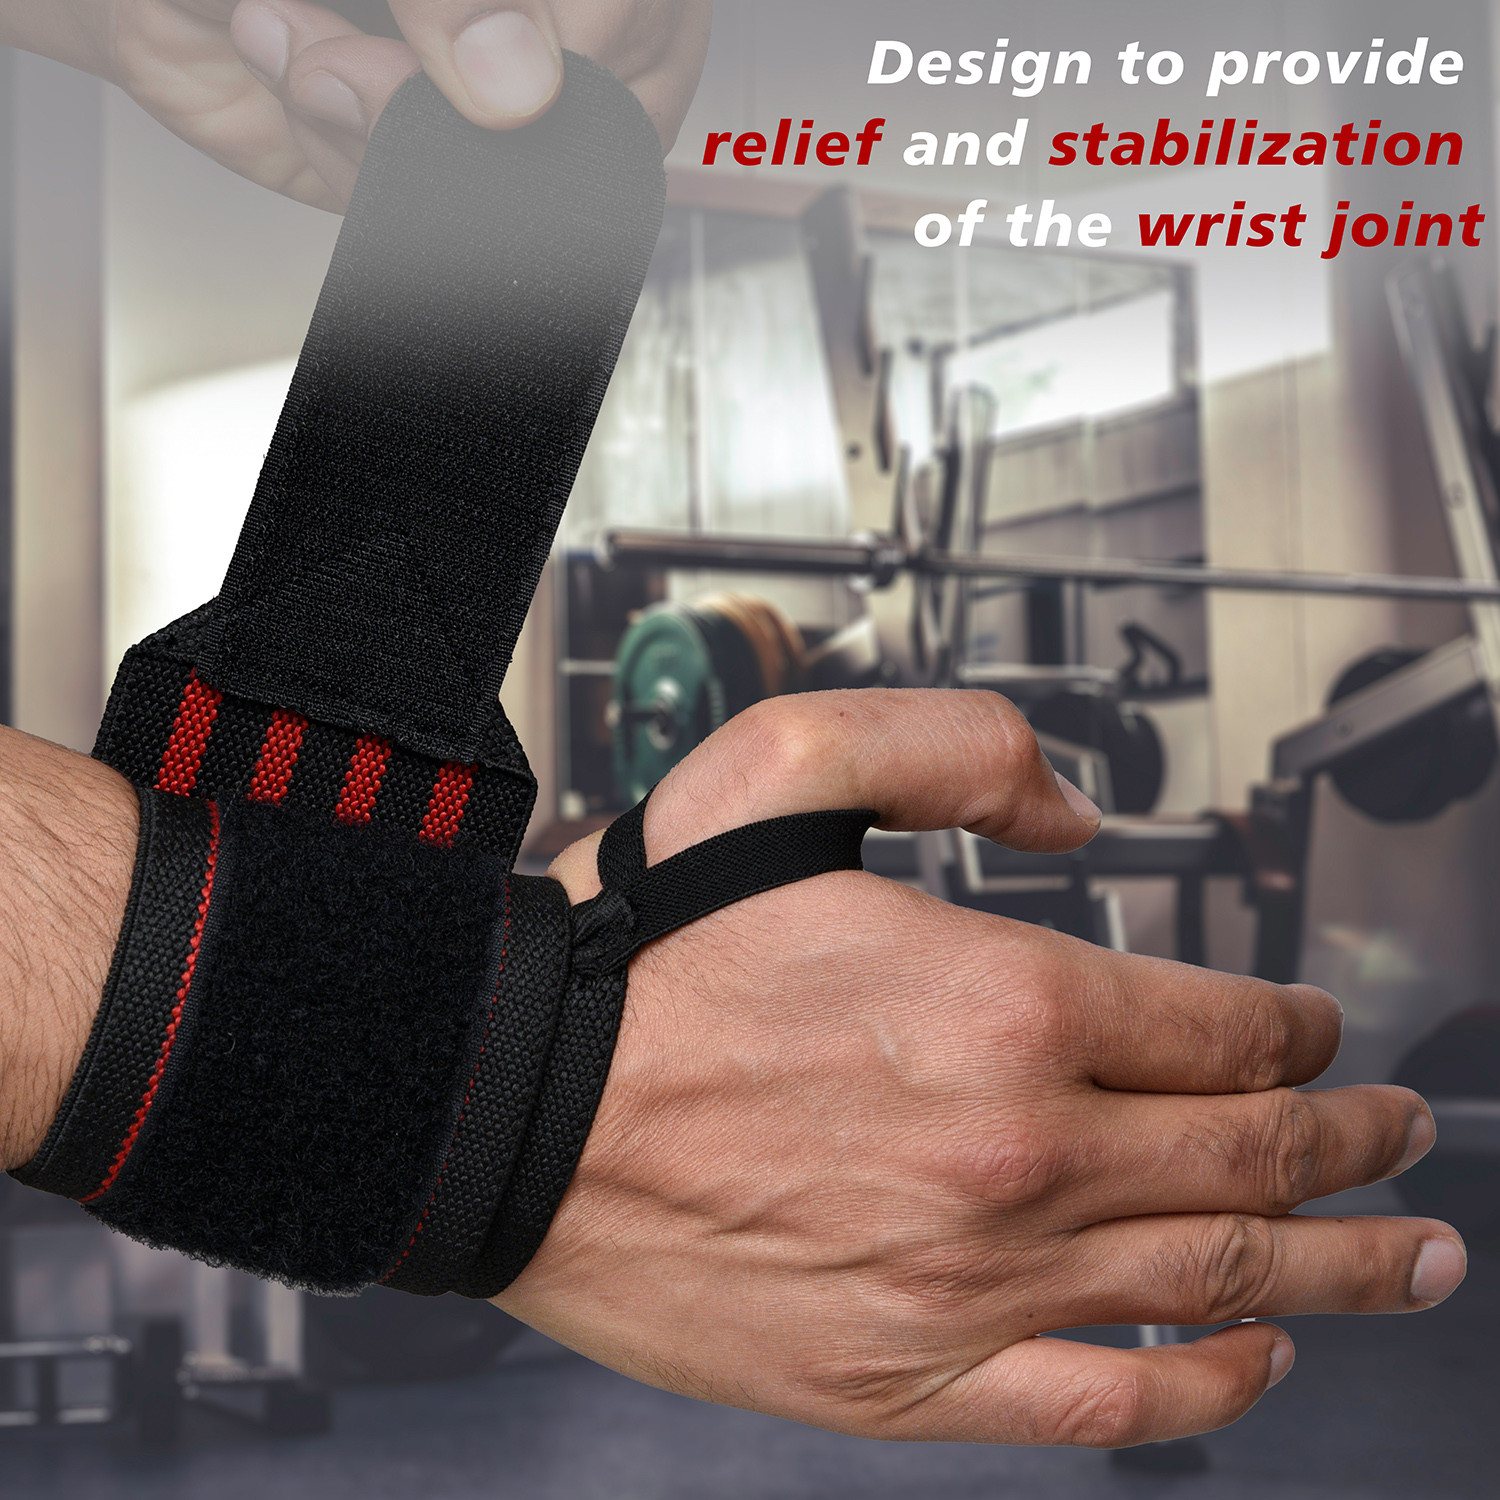 Kuber Industries Wrist Brace with Thumb Loop | Wrist Supporter for Gym | Nylon Wrist Wrap Band Strap for Men and Women | Pain Relief Band | 1 Pair | Red & Black